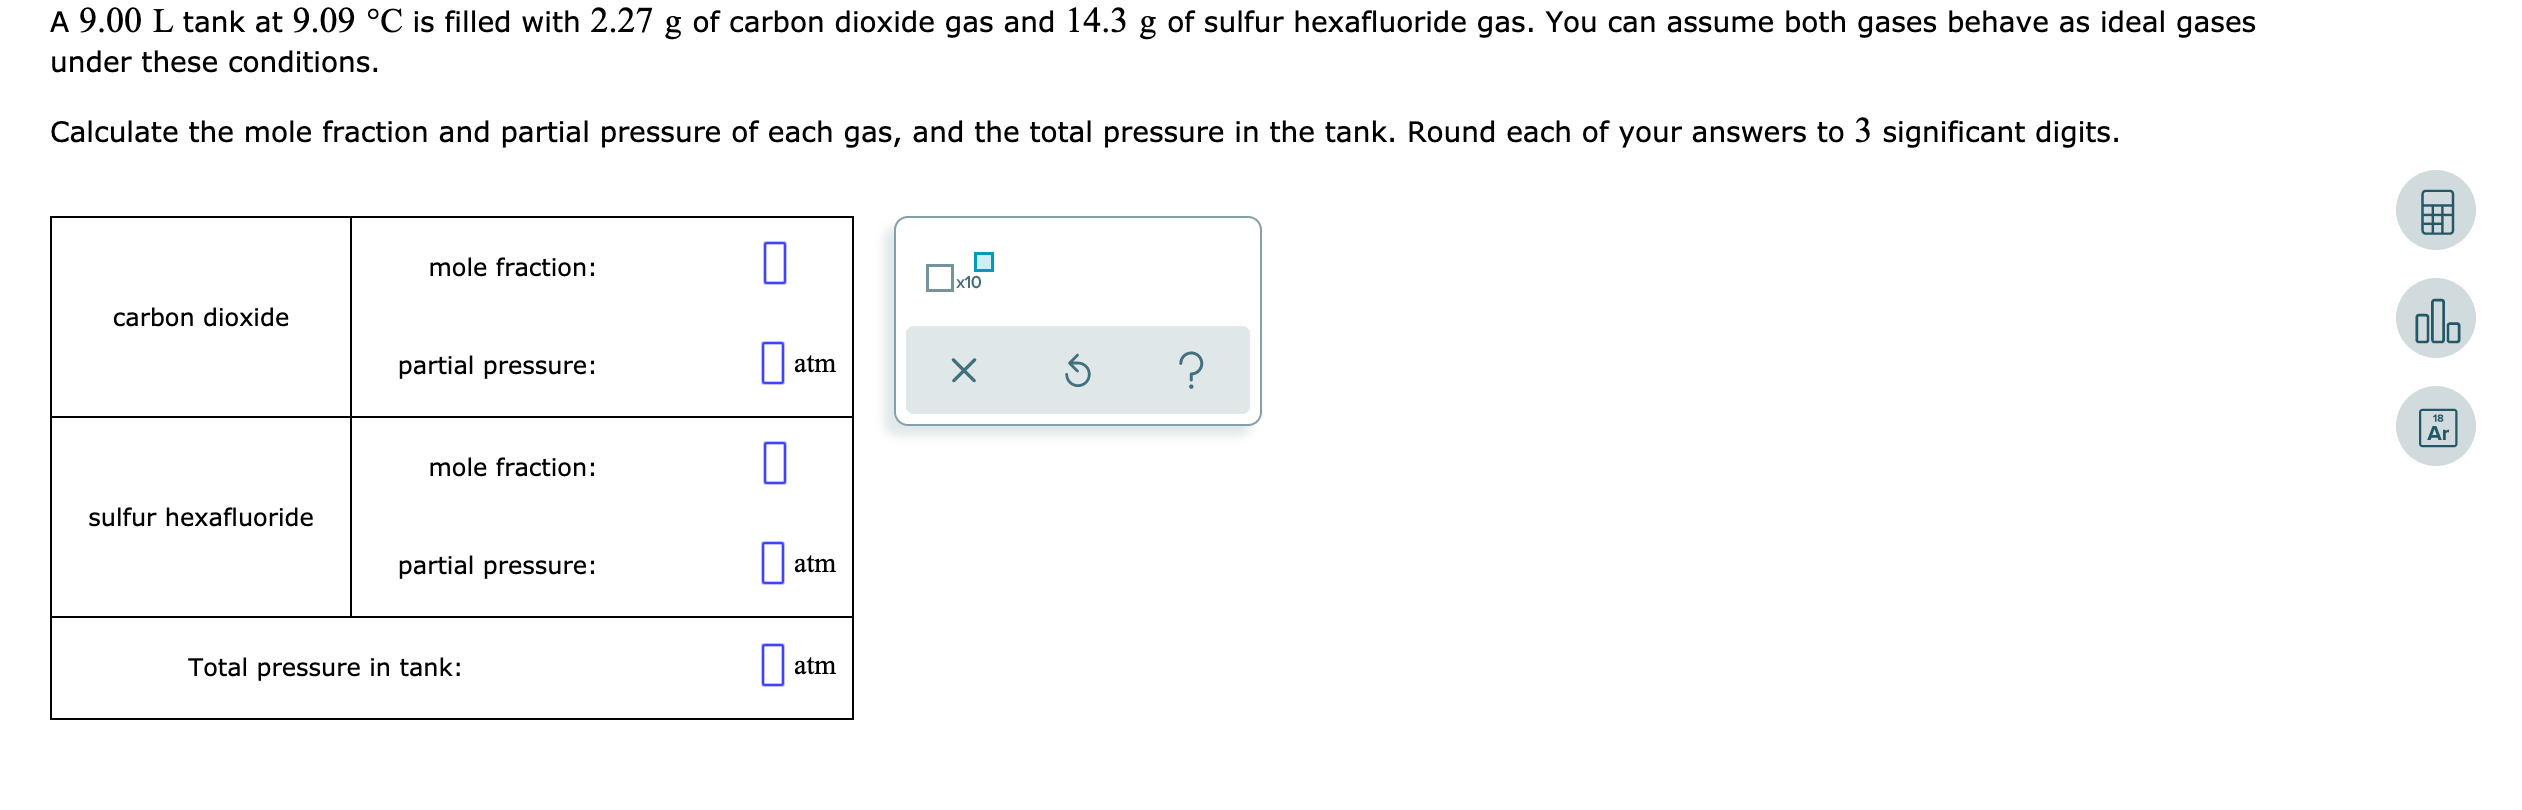 A 9.00 L tank at 9.09 Â°C is filled with 2.27 g of carbon dioxide gas and 14.3 g of sulfur hexafluoride gas. You can assume bo